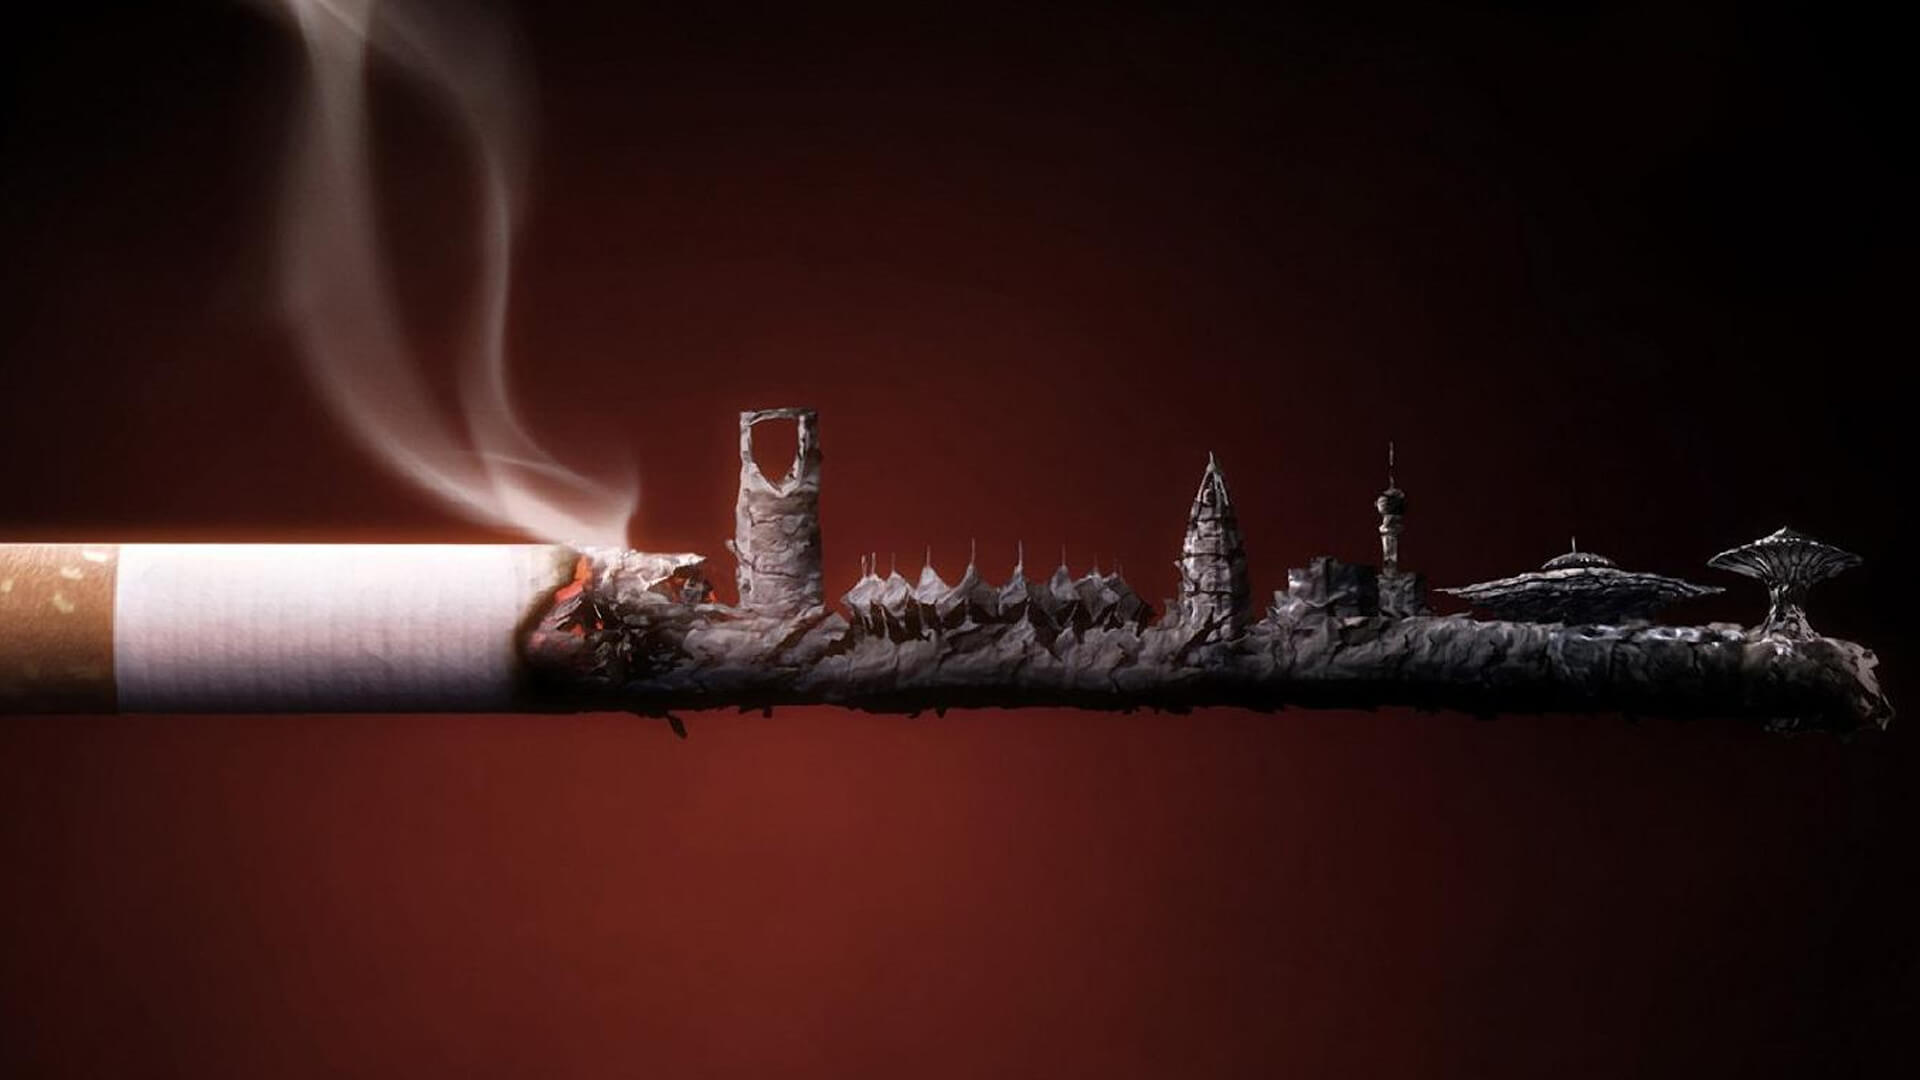 Burning Cigarette Cool Wallpapers Pictures